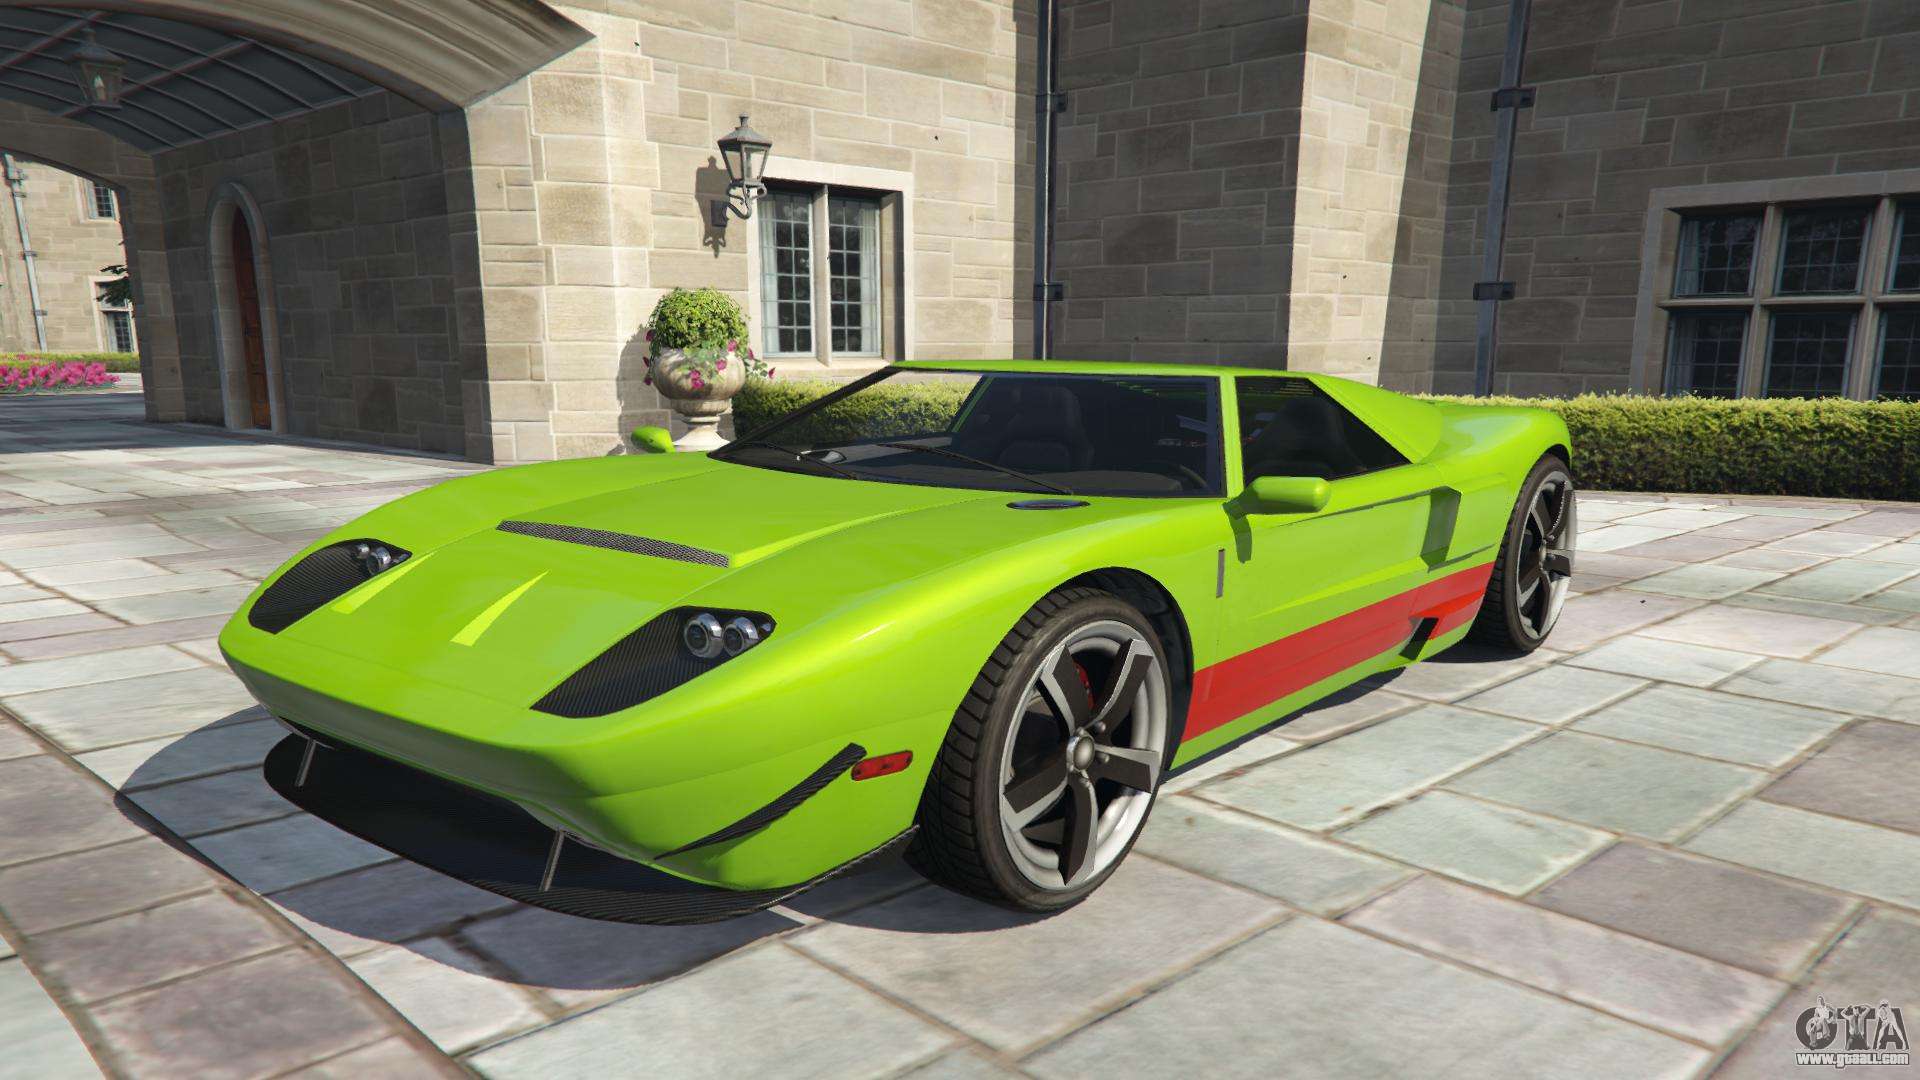 Vapid Bullet from GTA 5 - front view